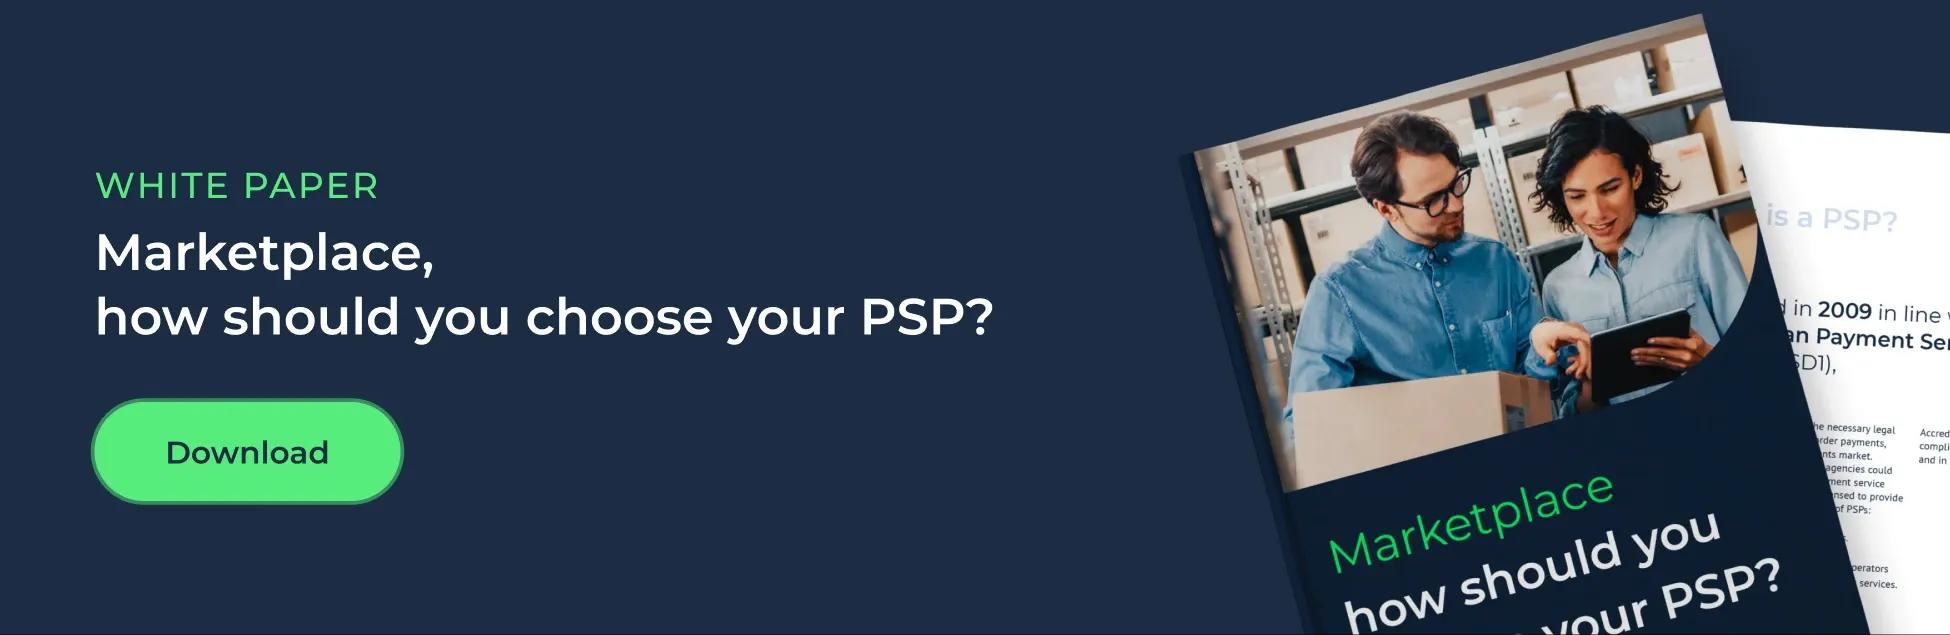 White paper: Marketplace how should you choose your PSP?